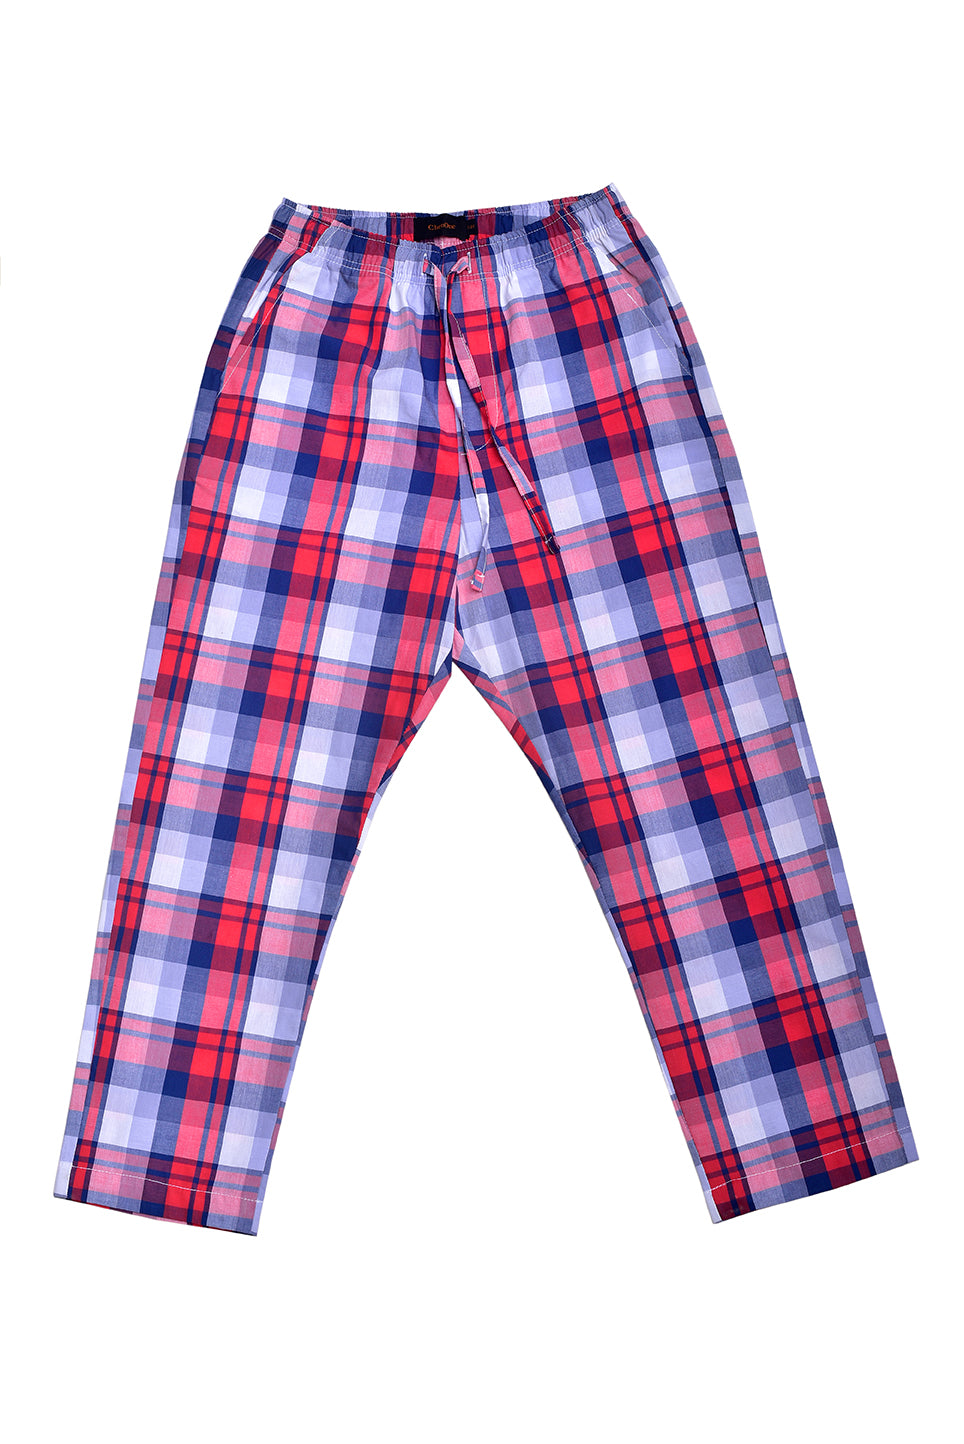 PULL ON TROUSER RED CHECK KDS-B-13112